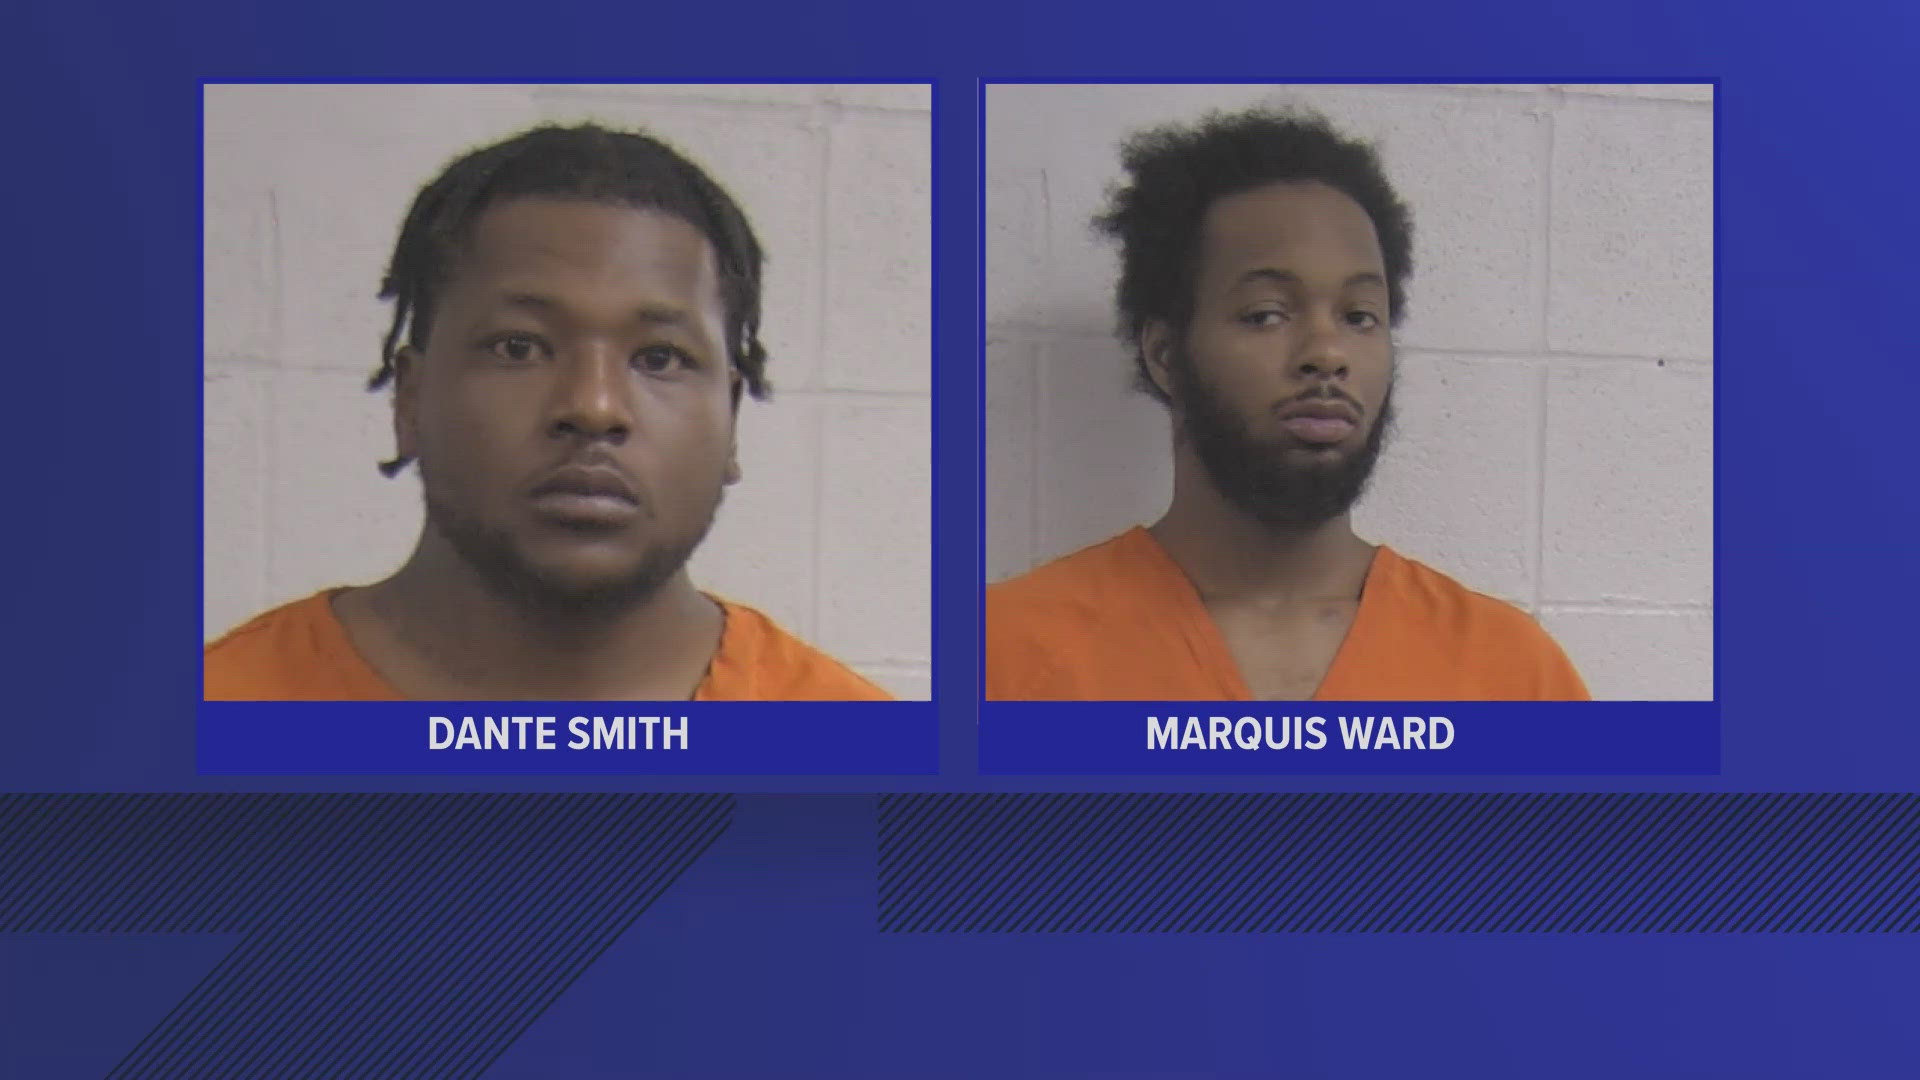 ​LMPD said the whole incident was caught on camera, which is how they were able to identify both Marquis Ward and Dante Smith.